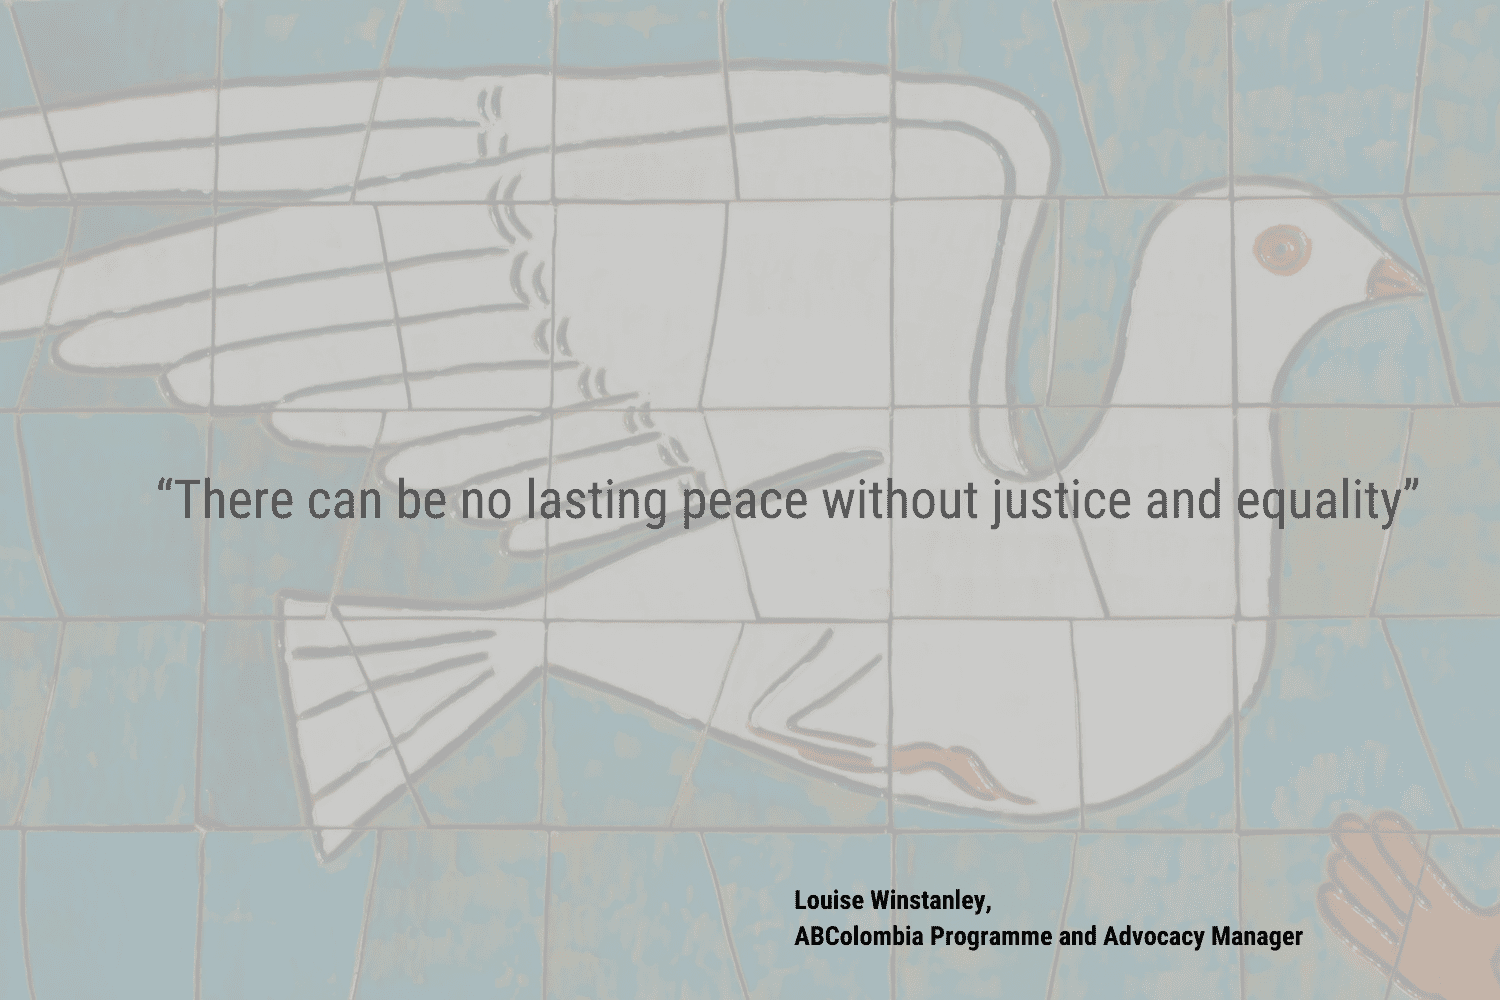 There-can-be-no-lasting-peace-without-justice-and-equality-Louise-Winstanley-ABColombia-Programme-and-Advocacy-Manager-1500-×-1000px